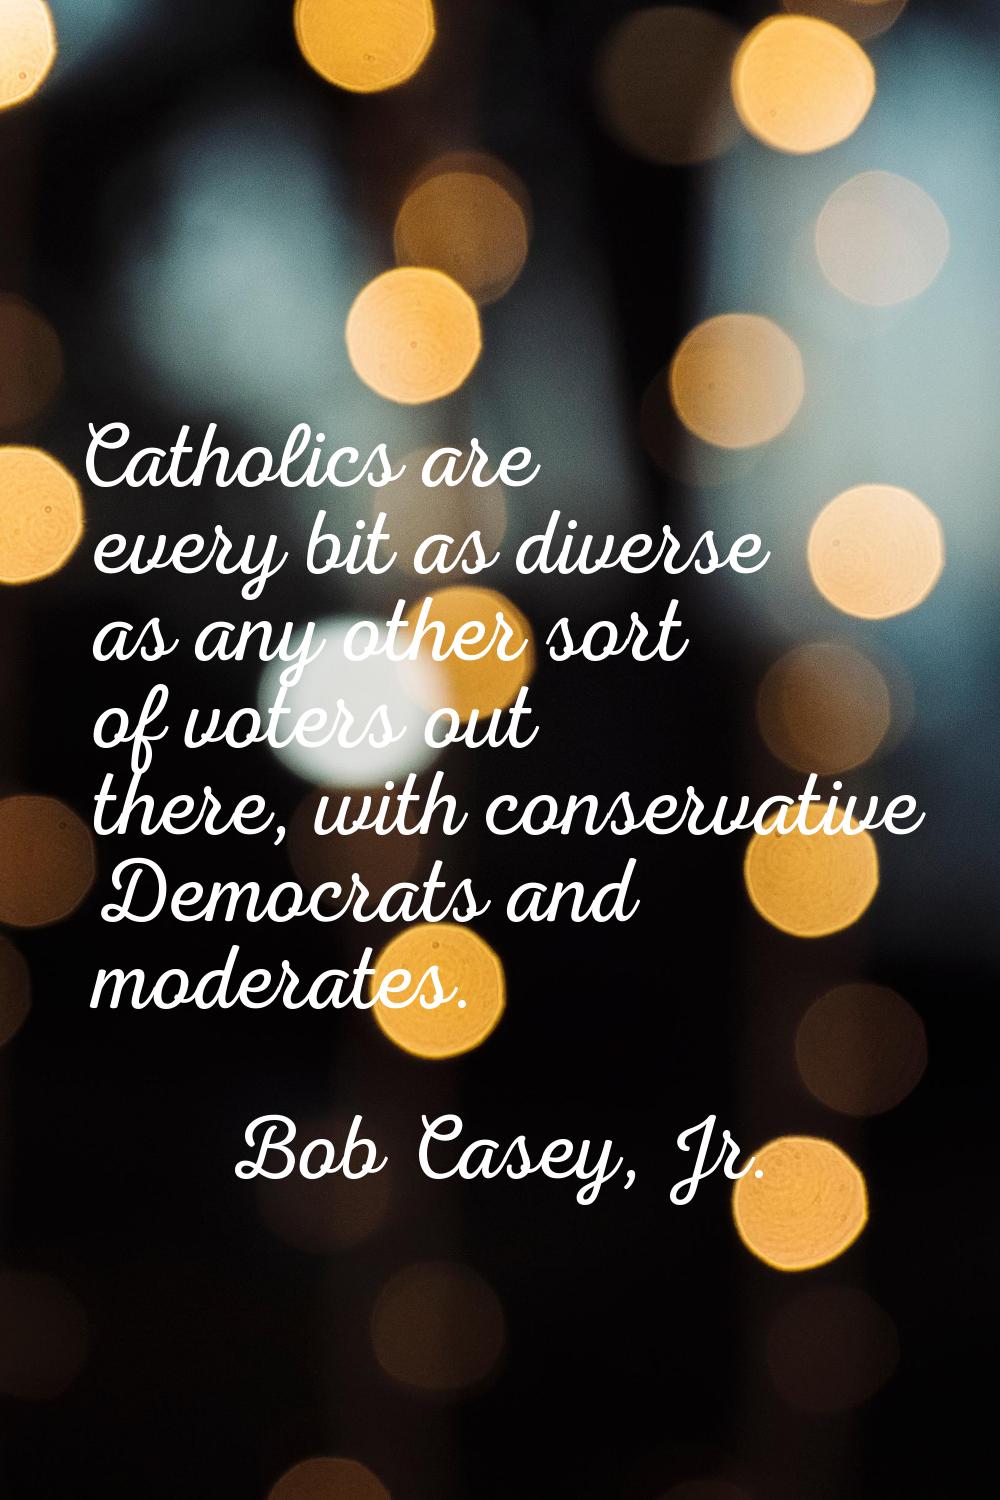 Catholics are every bit as diverse as any other sort of voters out there, with conservative Democra